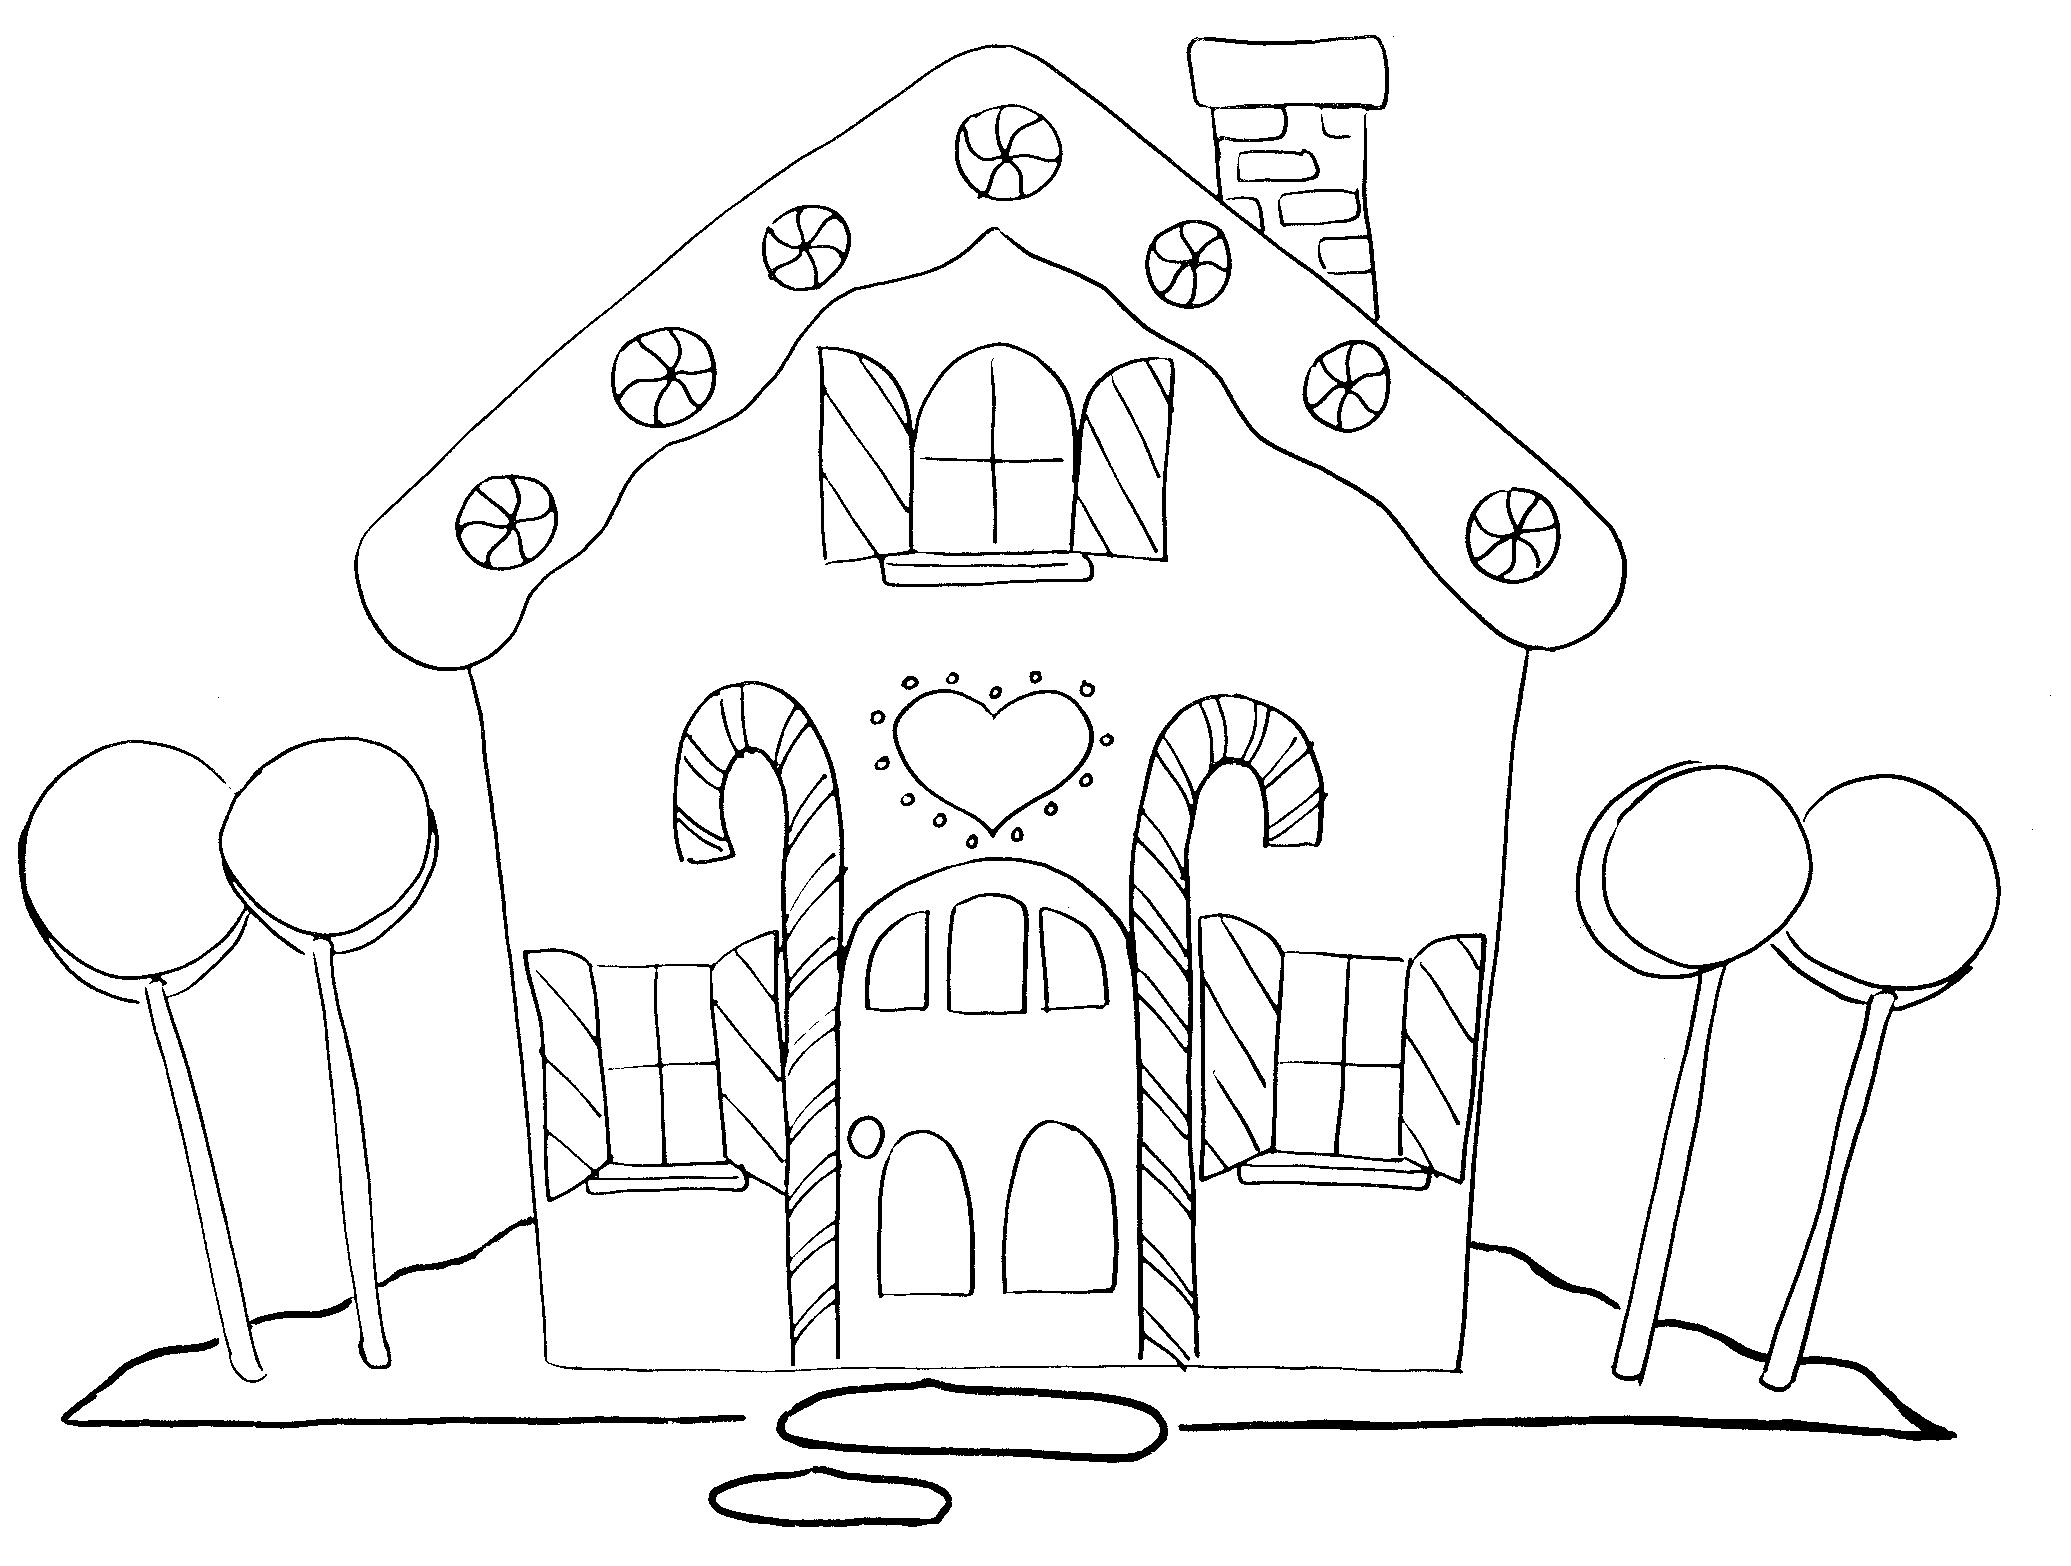 Gingerbread House Page Coloring Sheets Image